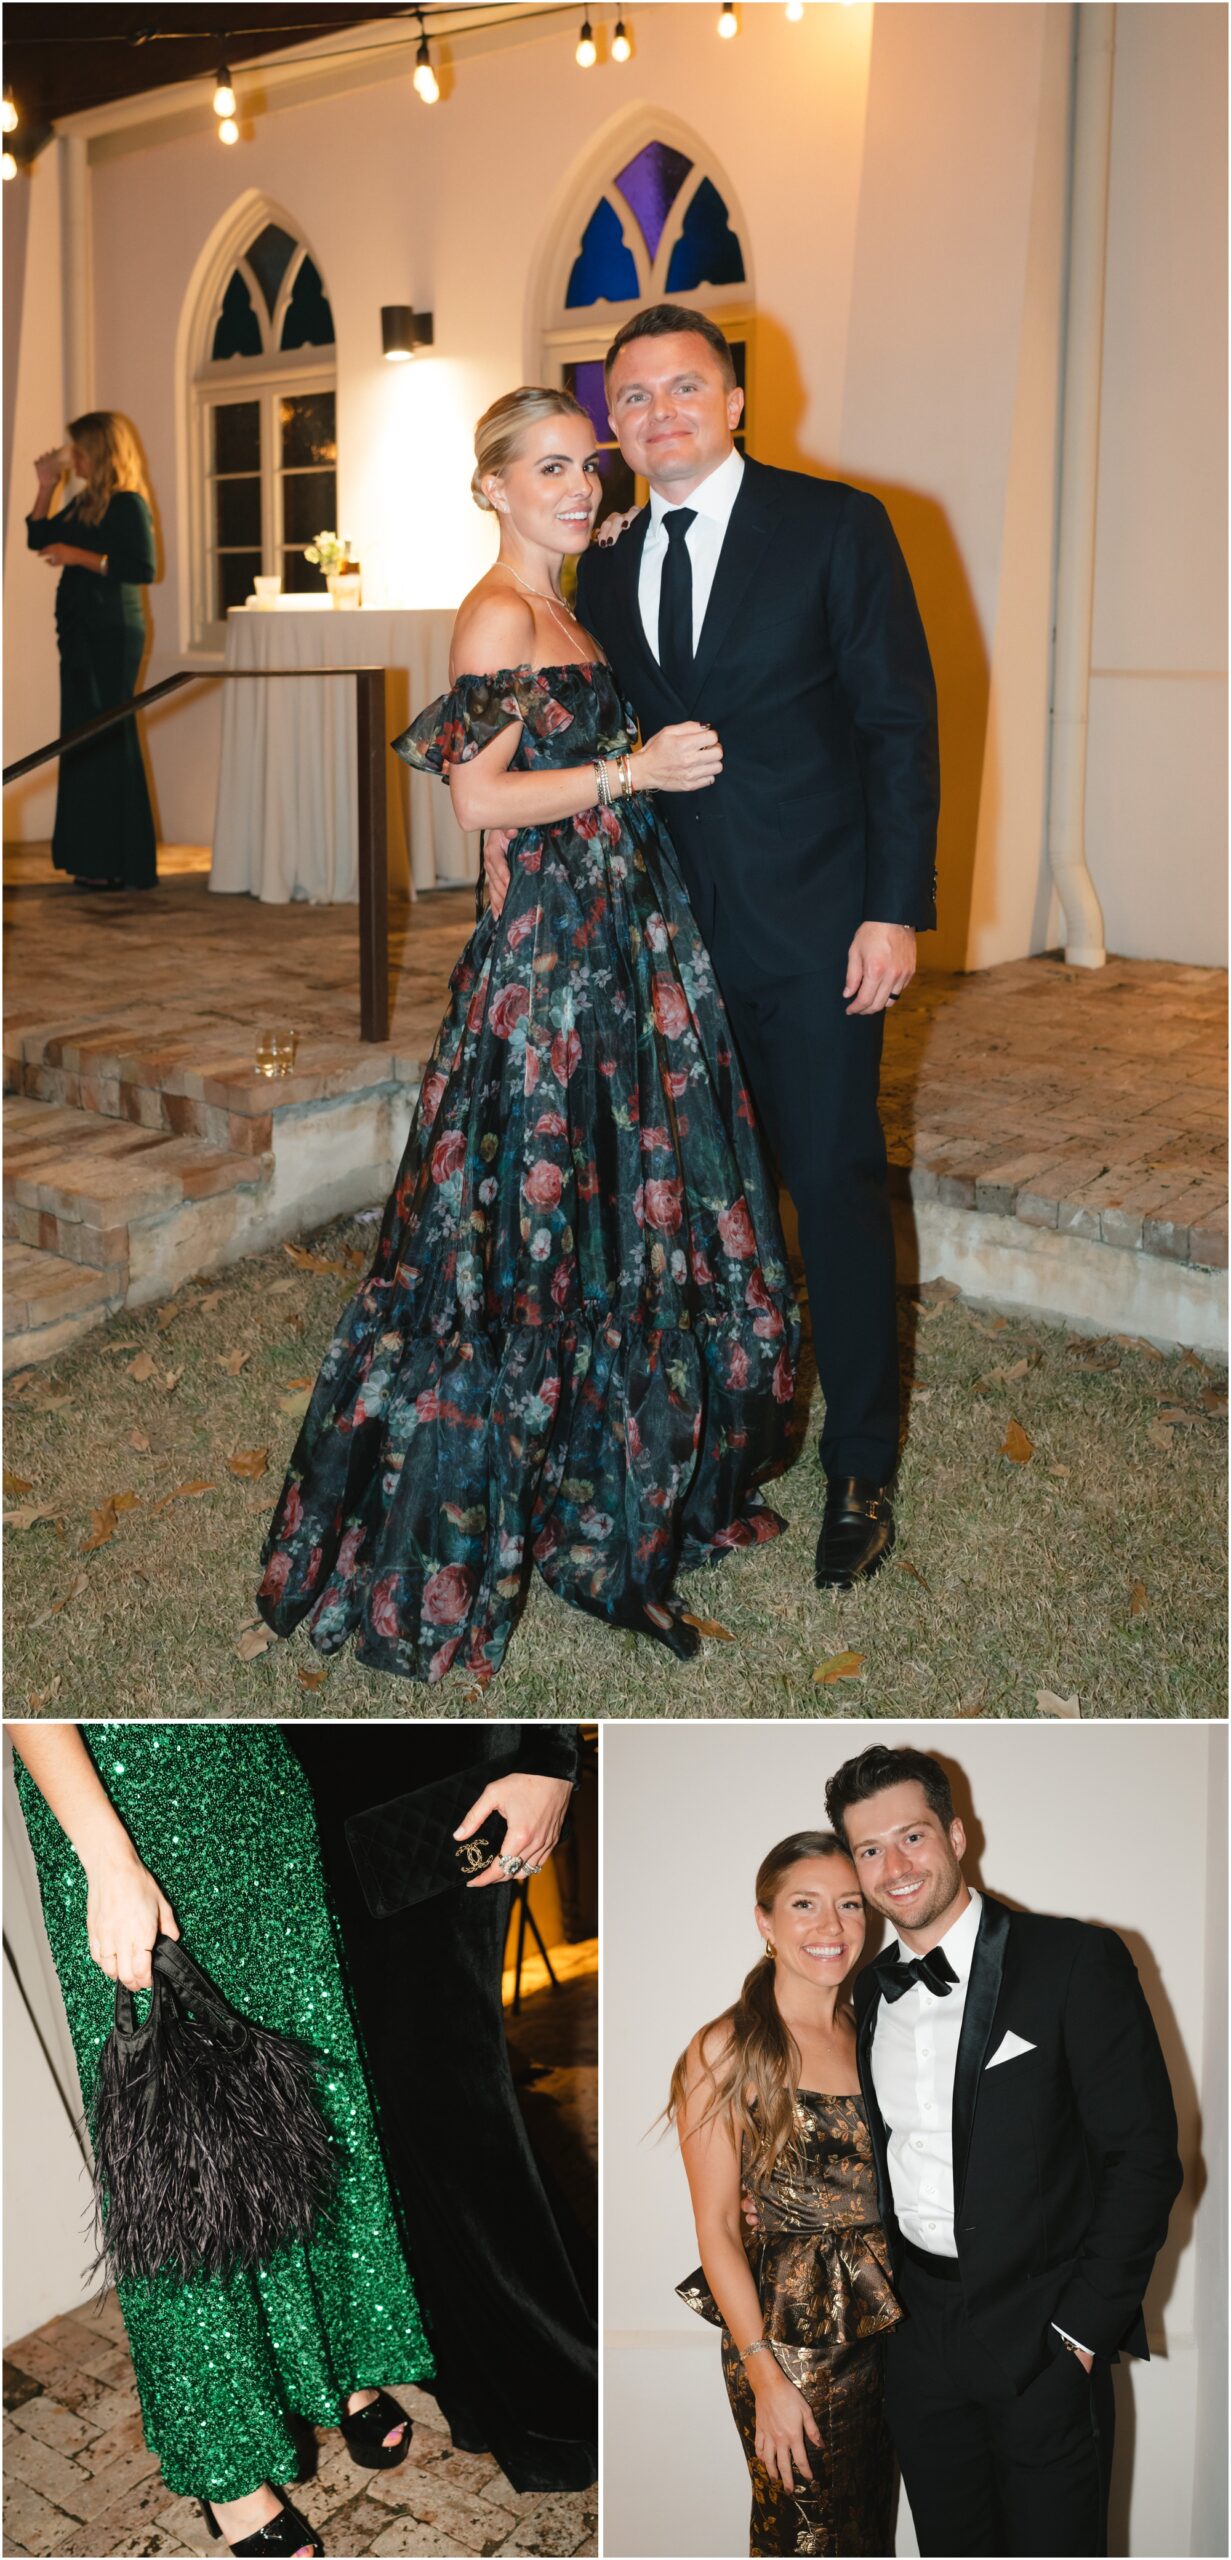 black tie wedding guest inspiration at a wedding at commodore perry estate in austin texas